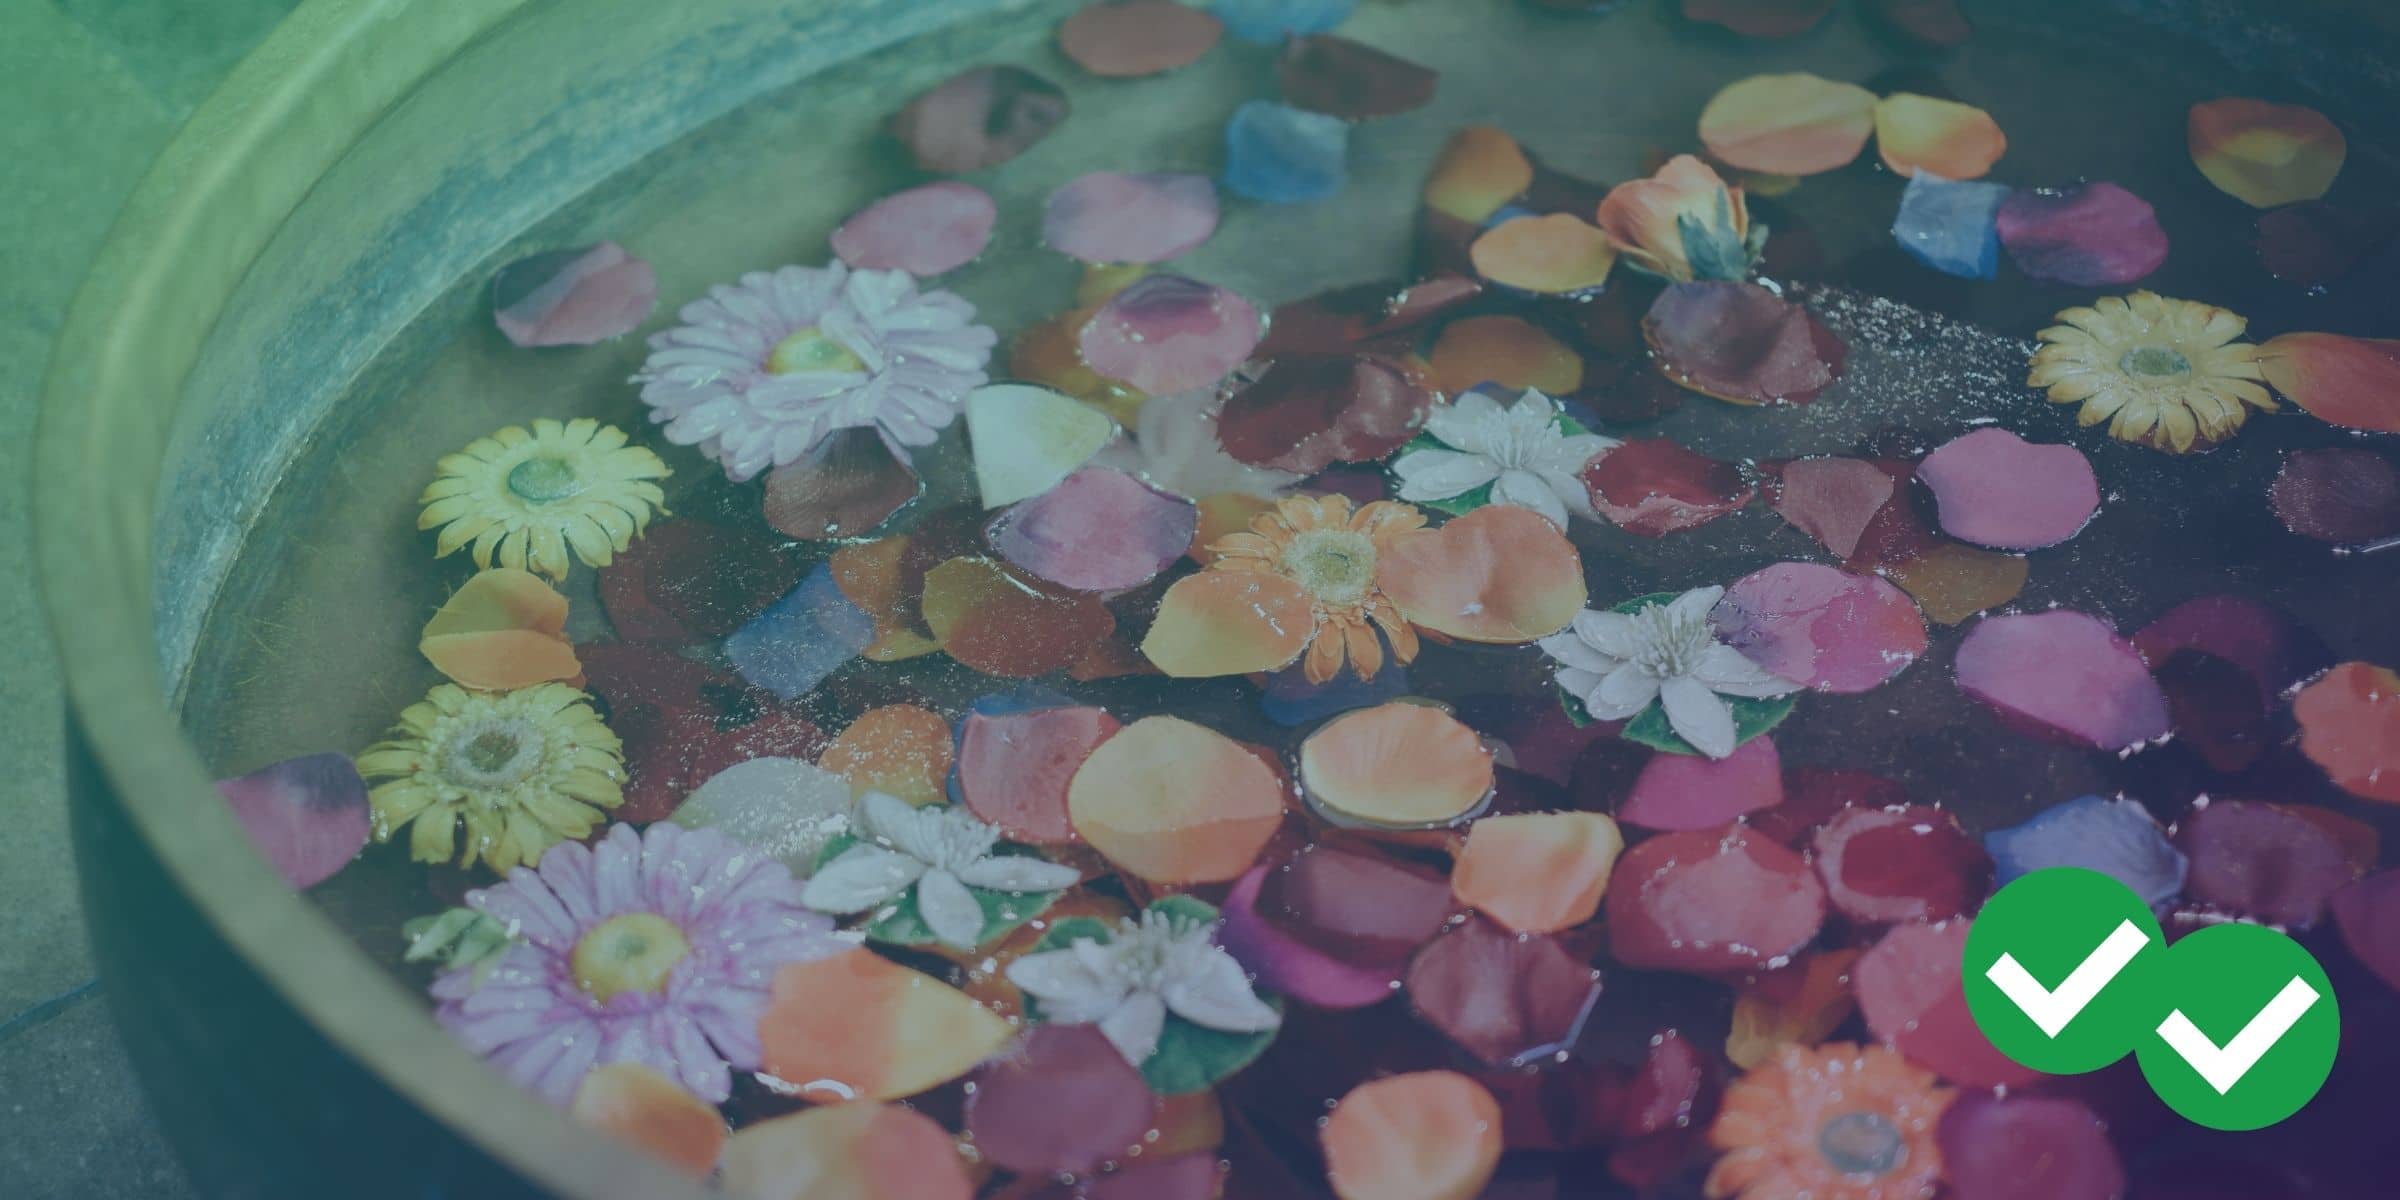 Flowers floating in water to represent fluid dynamics